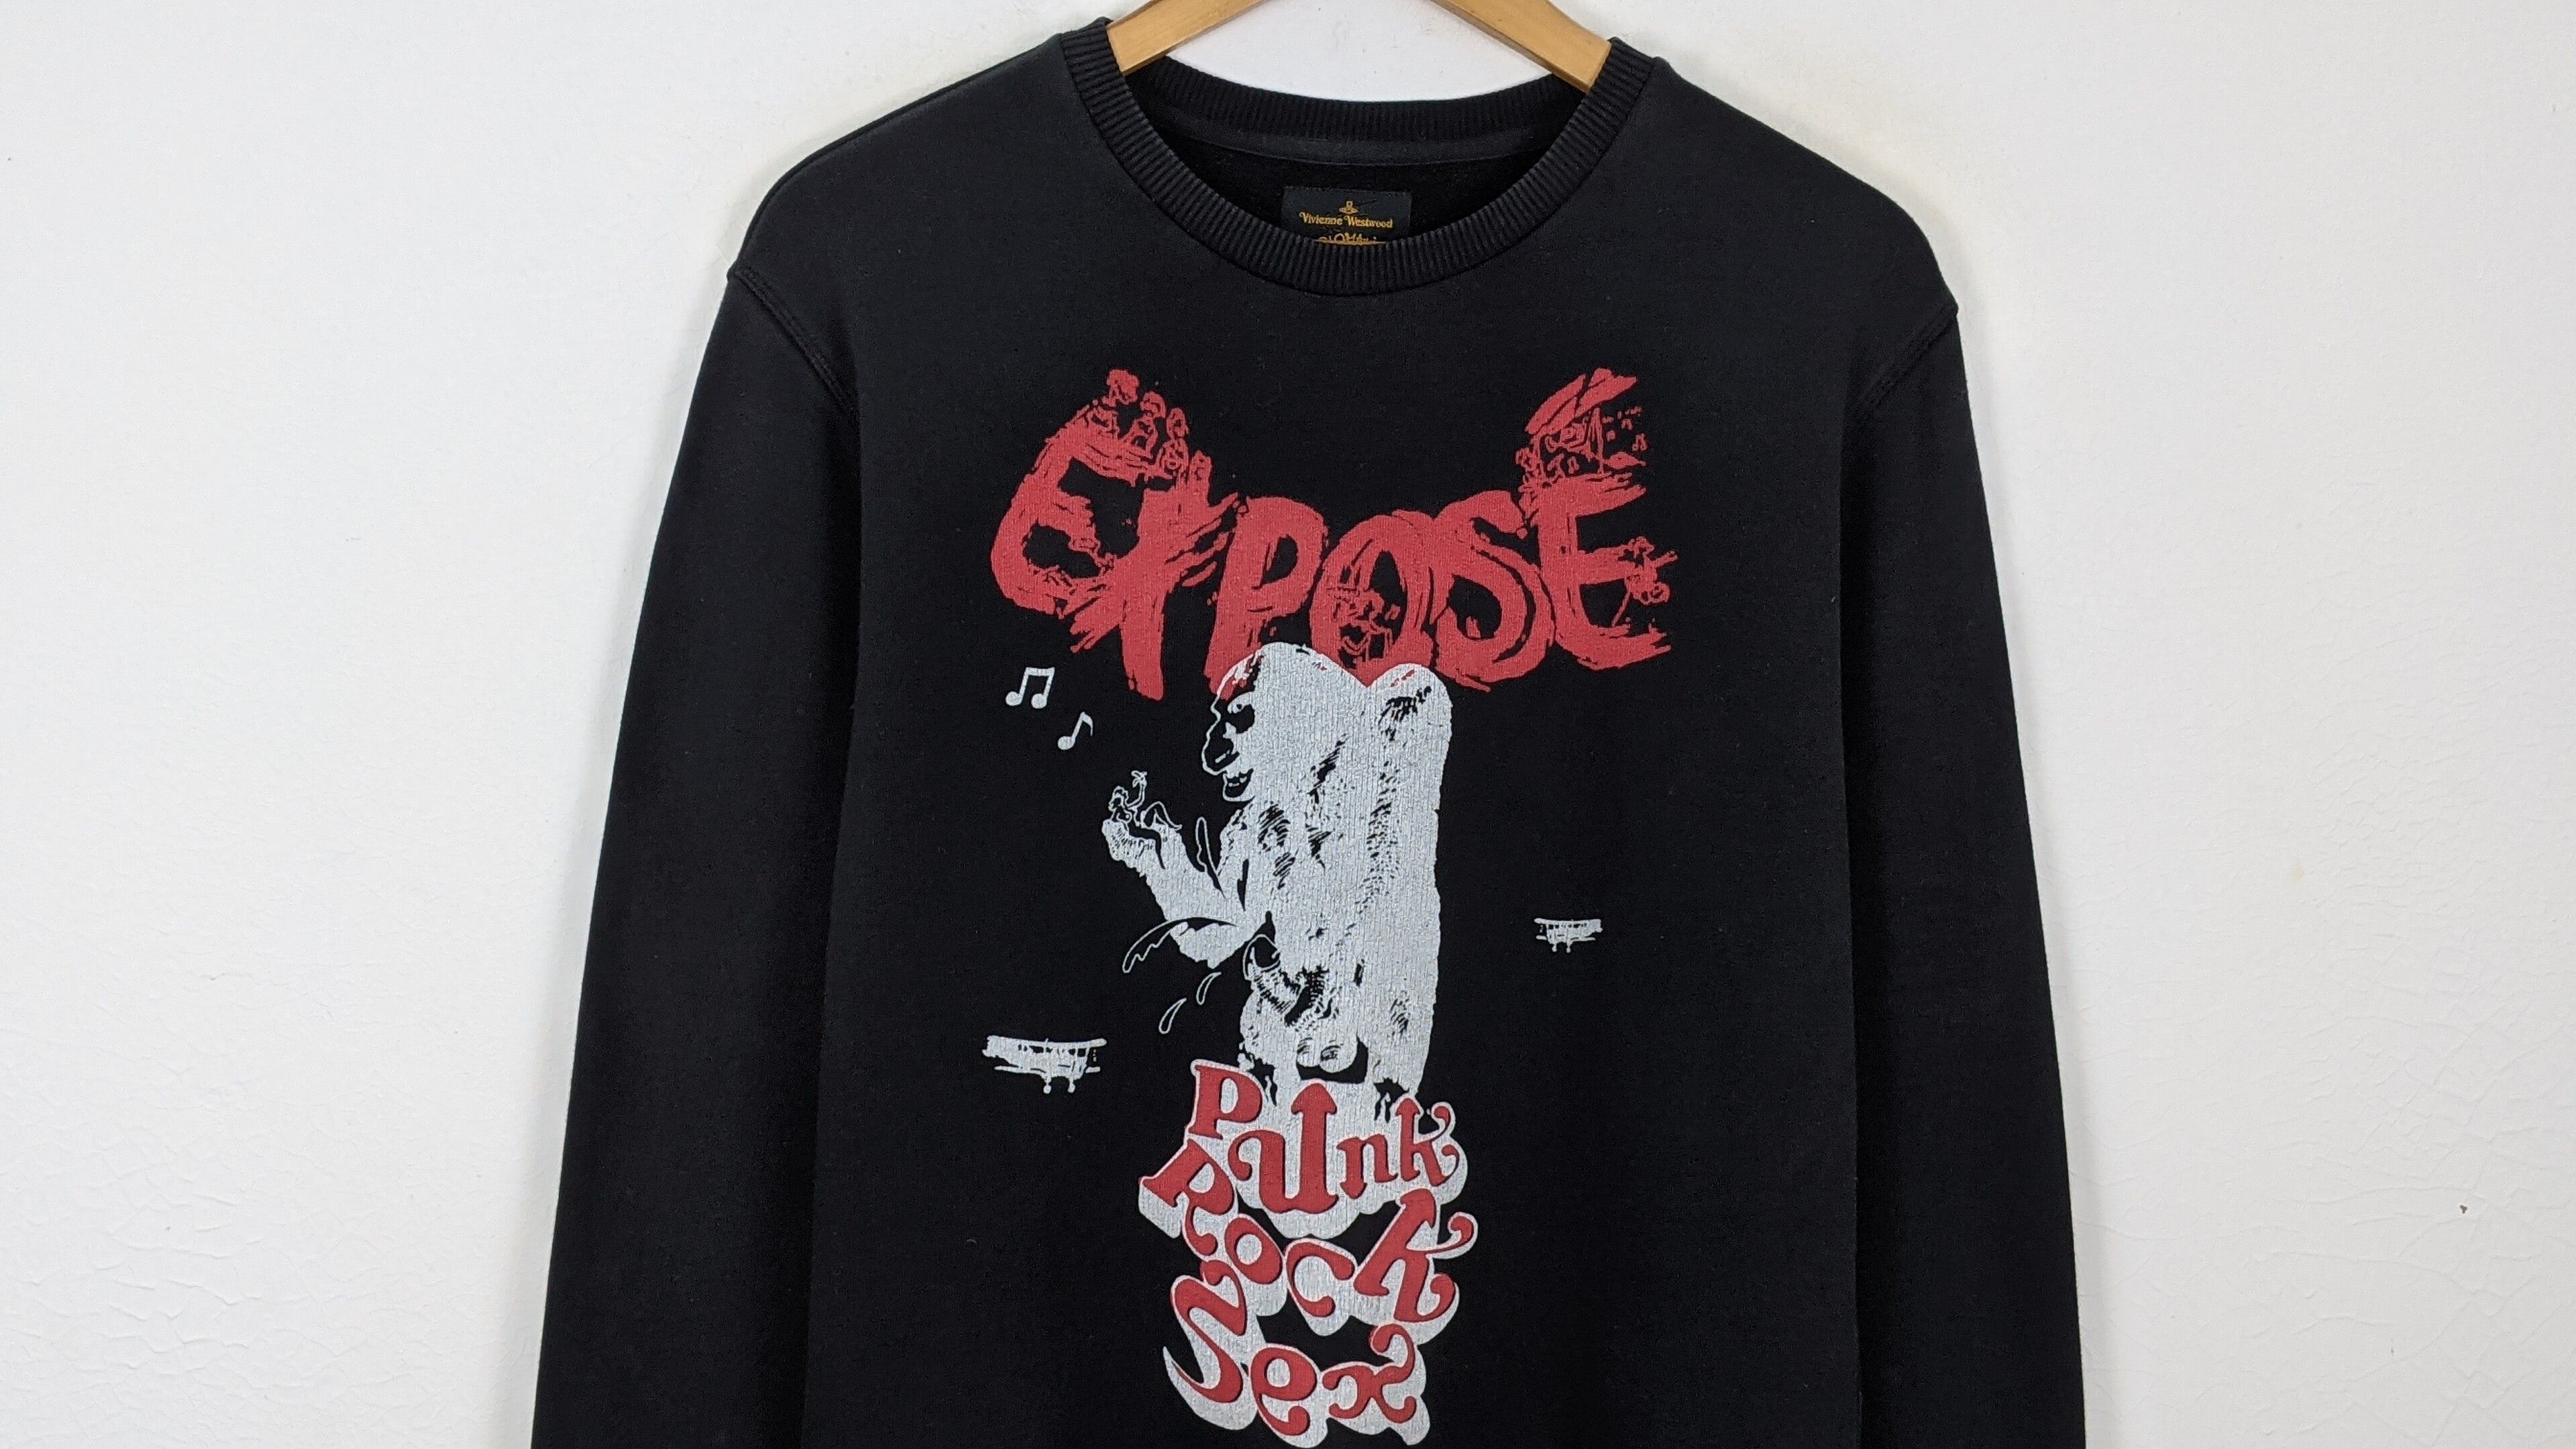 Vivienne Westwood Anglomania Expose Punk Rock Sex sweat - 2